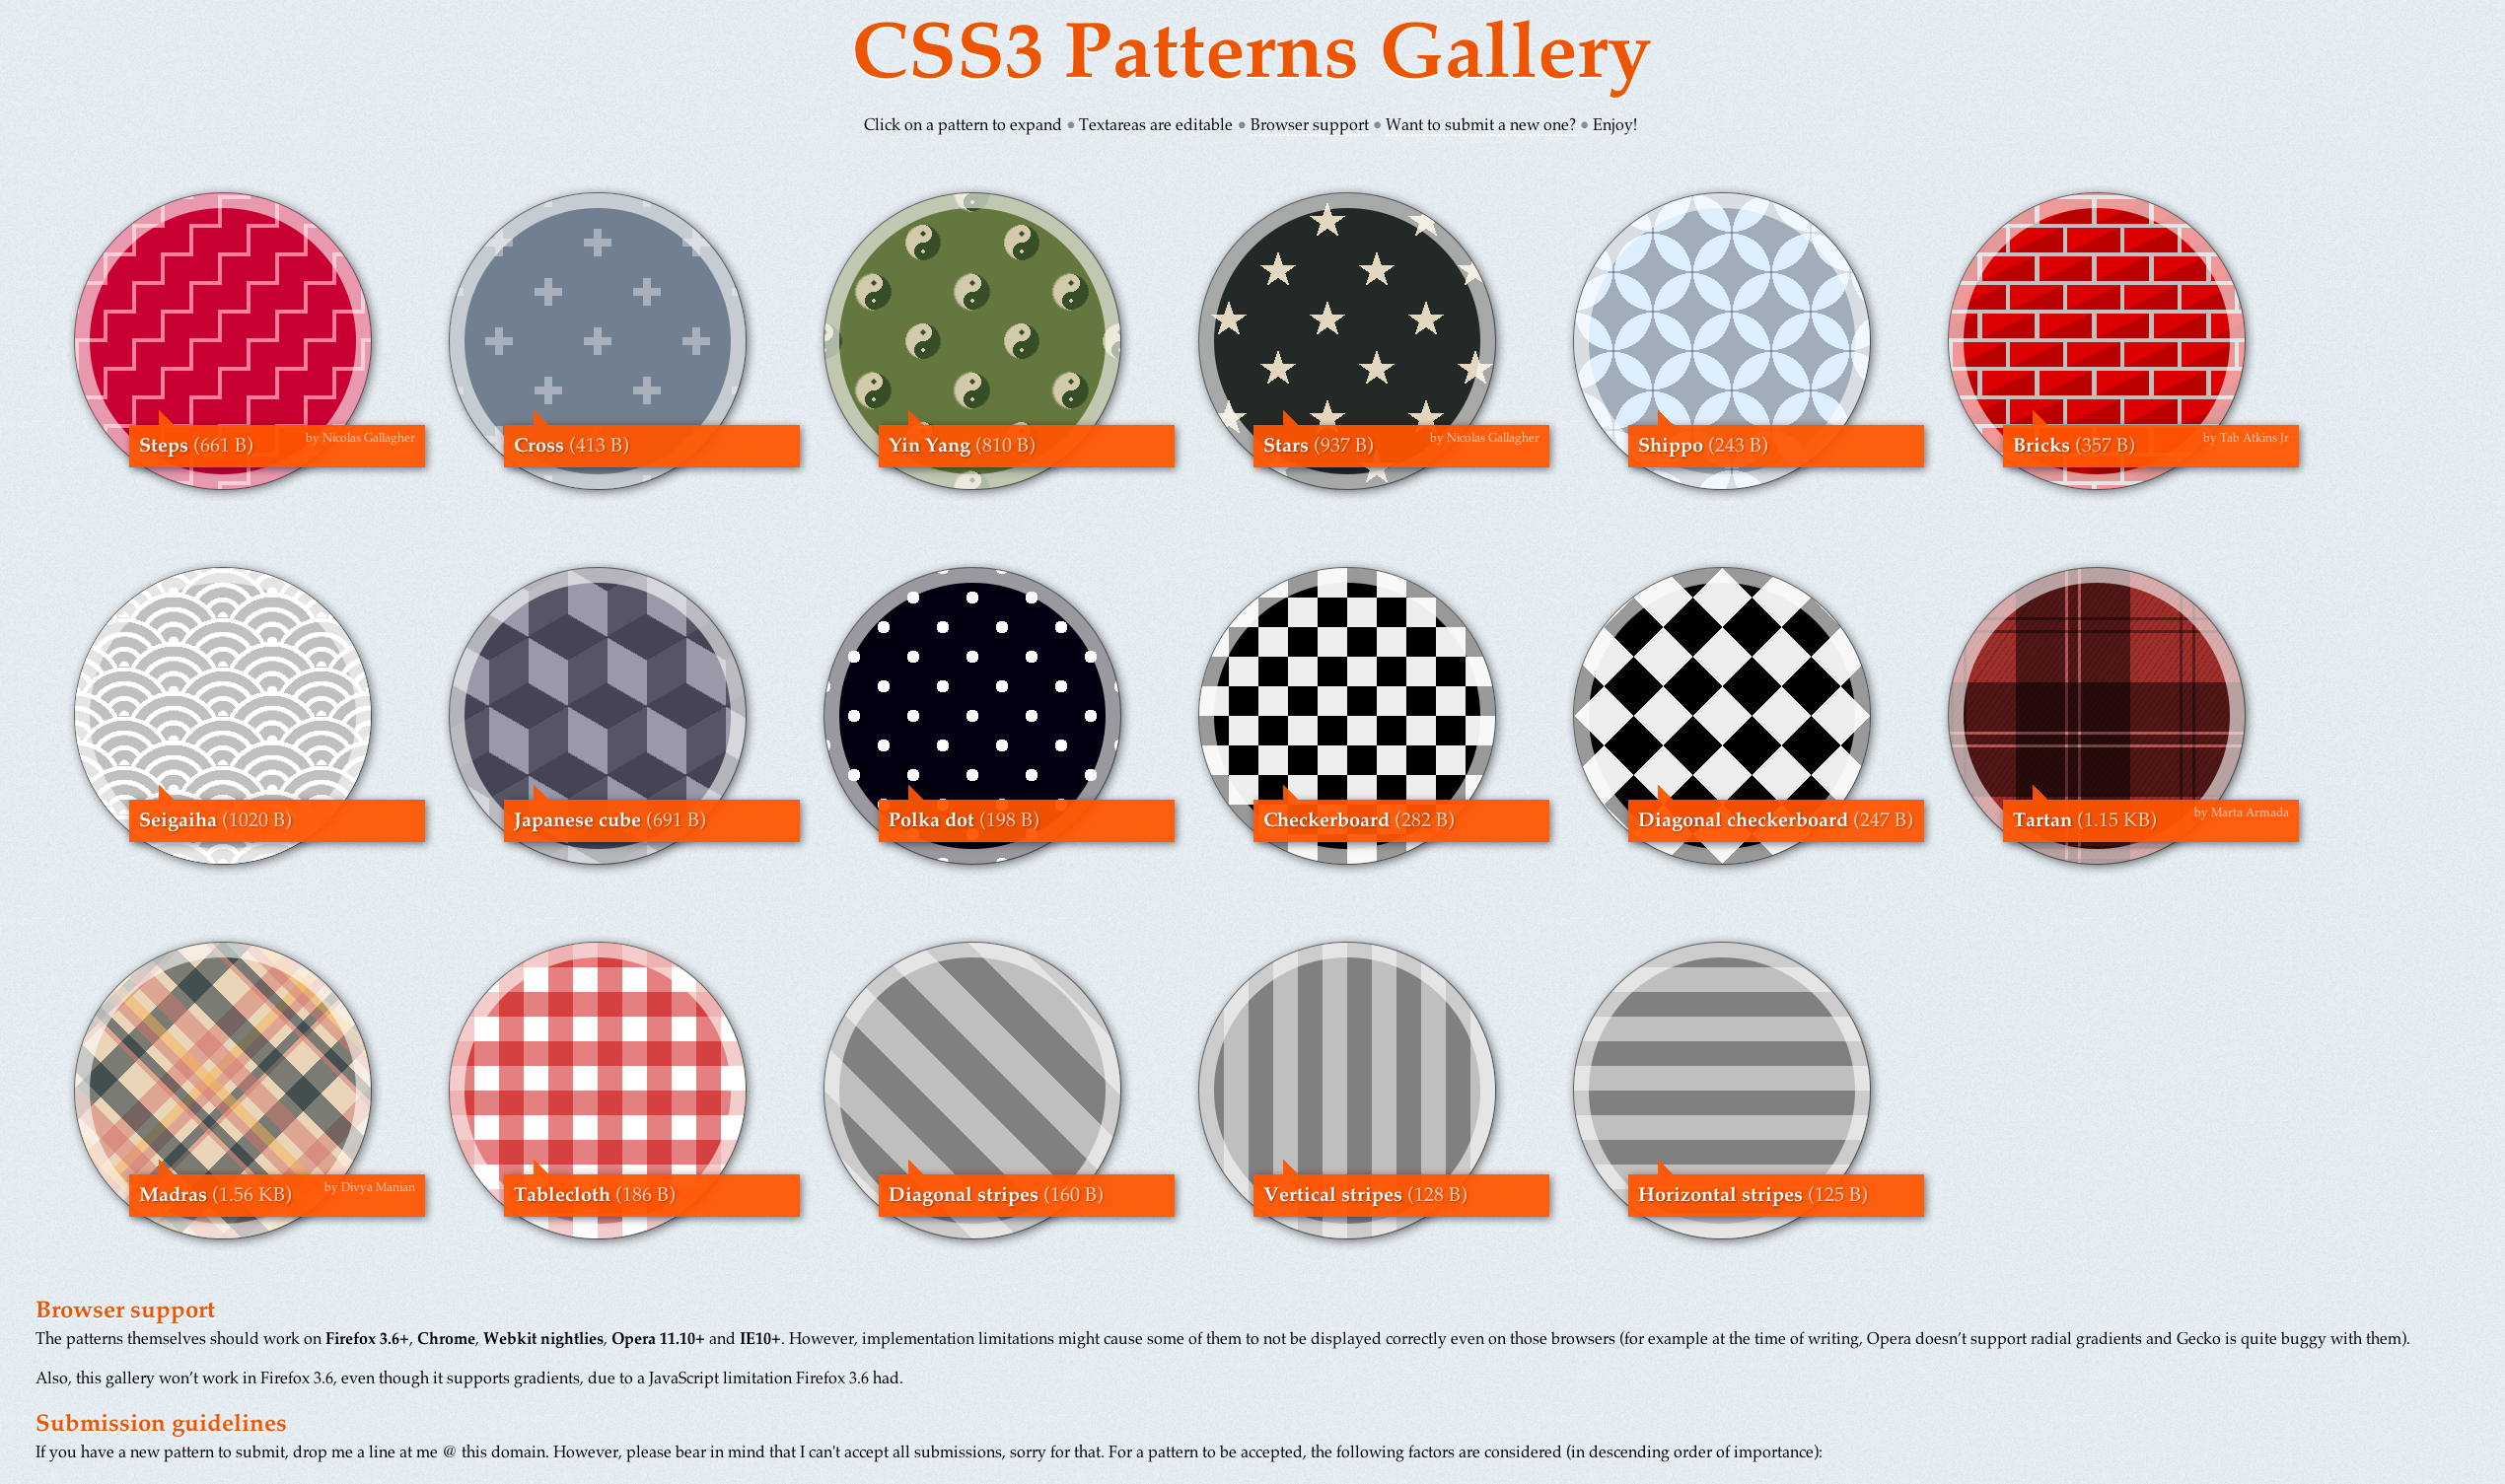 Screenshot from my CSS3 patterns gallery